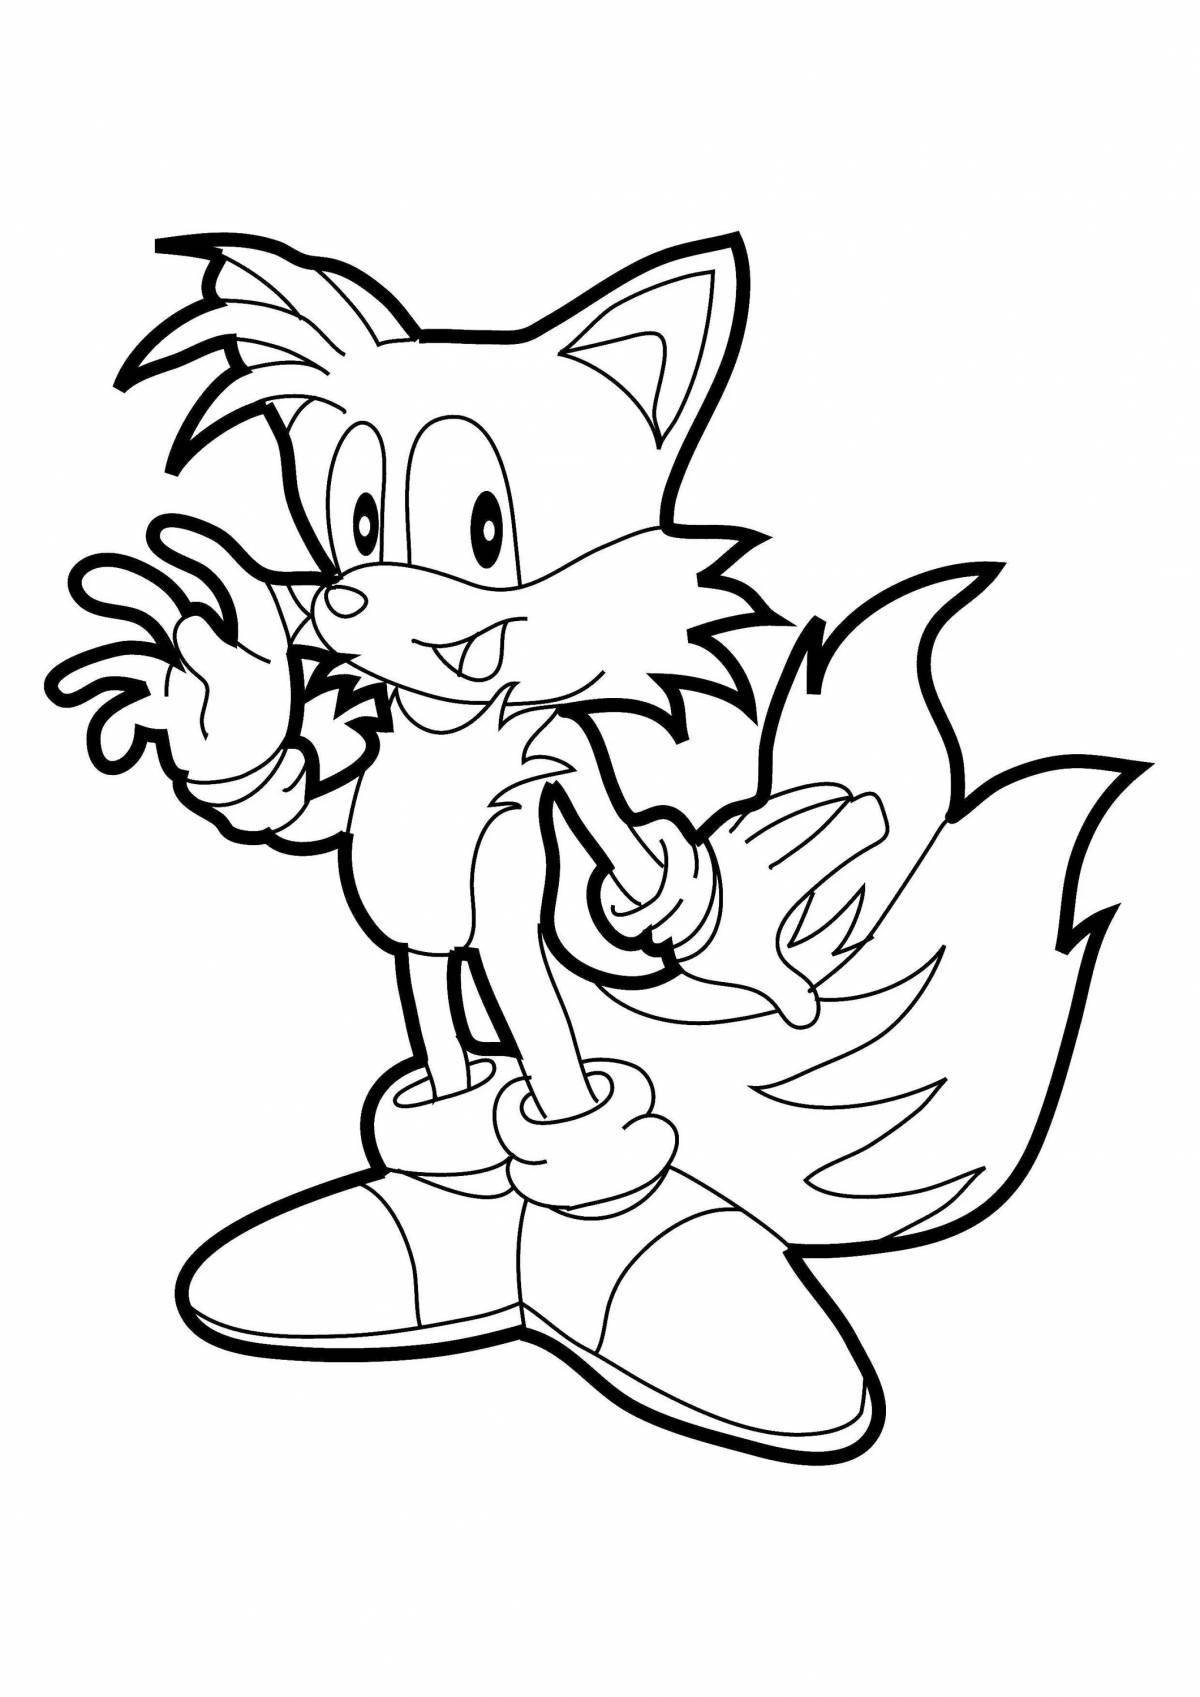 Incredible sonic coloring page